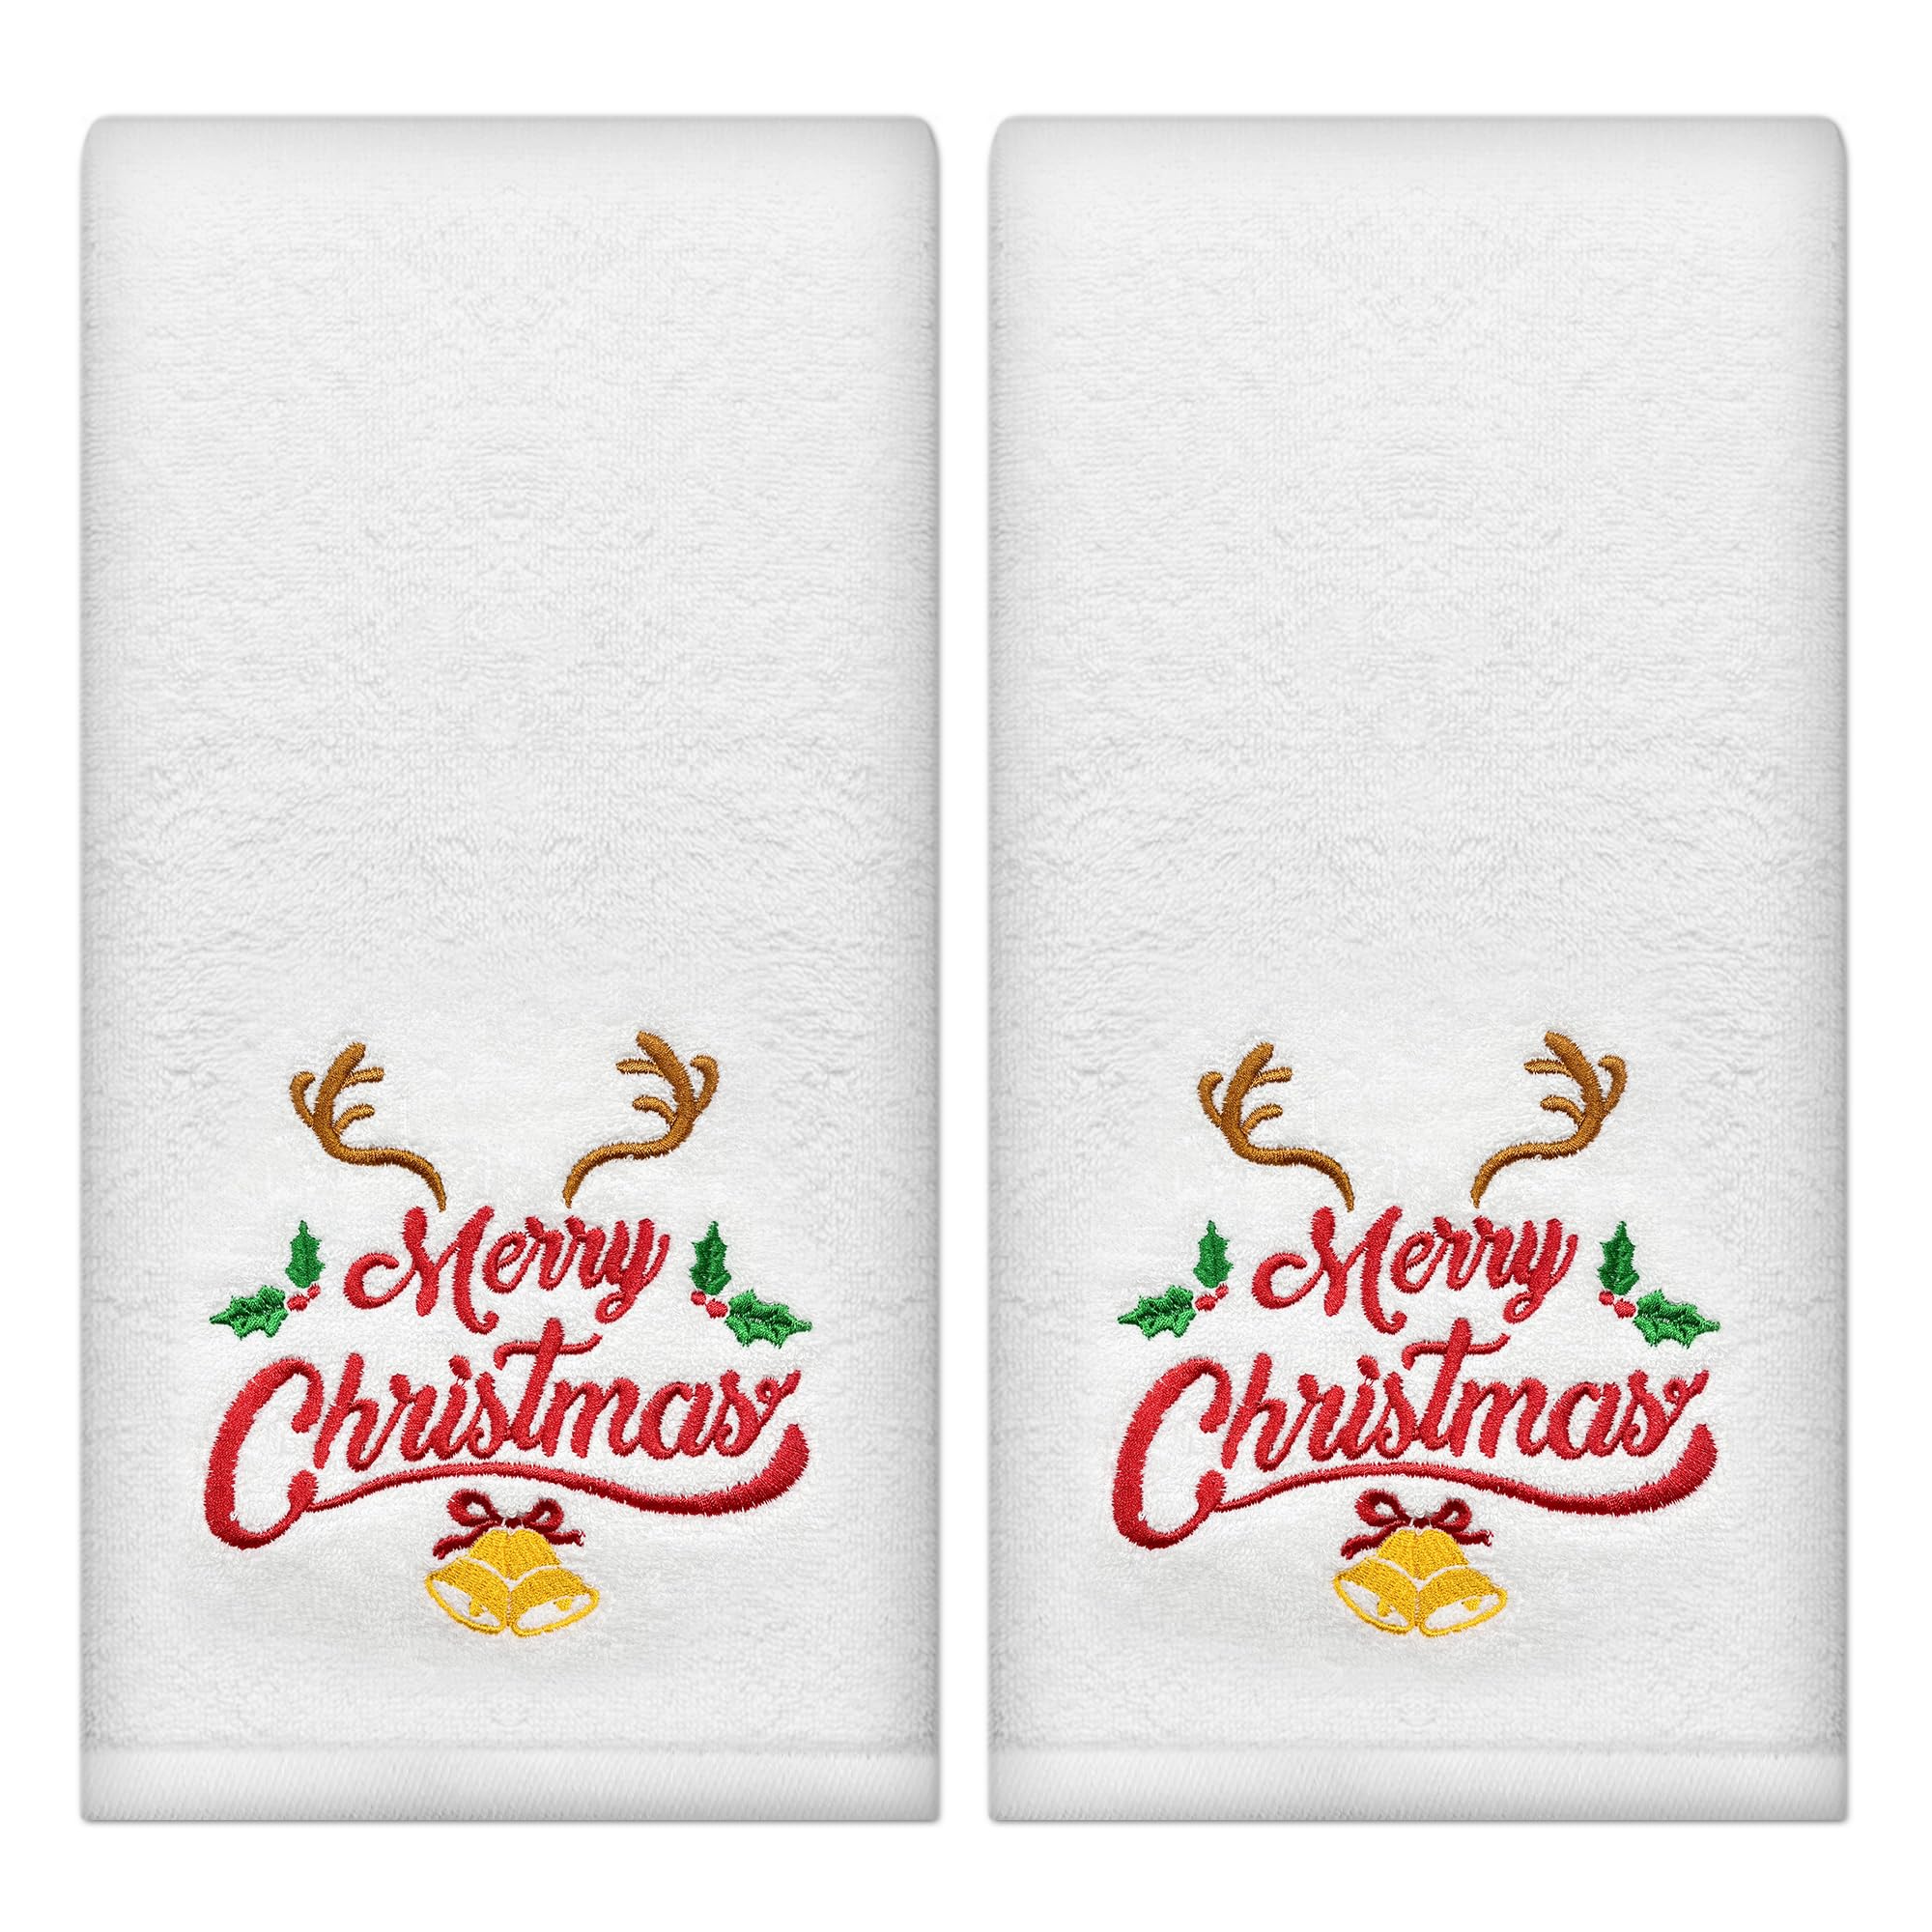 Christmas Hand Towels Cotton Embroidered Sets of 2 - Christmas Kitchen Towels Bathroom - Christmas Dish Towels Tea Dishcloths - Holiday Decorative Winter Xmas Tree Farmhouse Hostess Housewarming Gifts